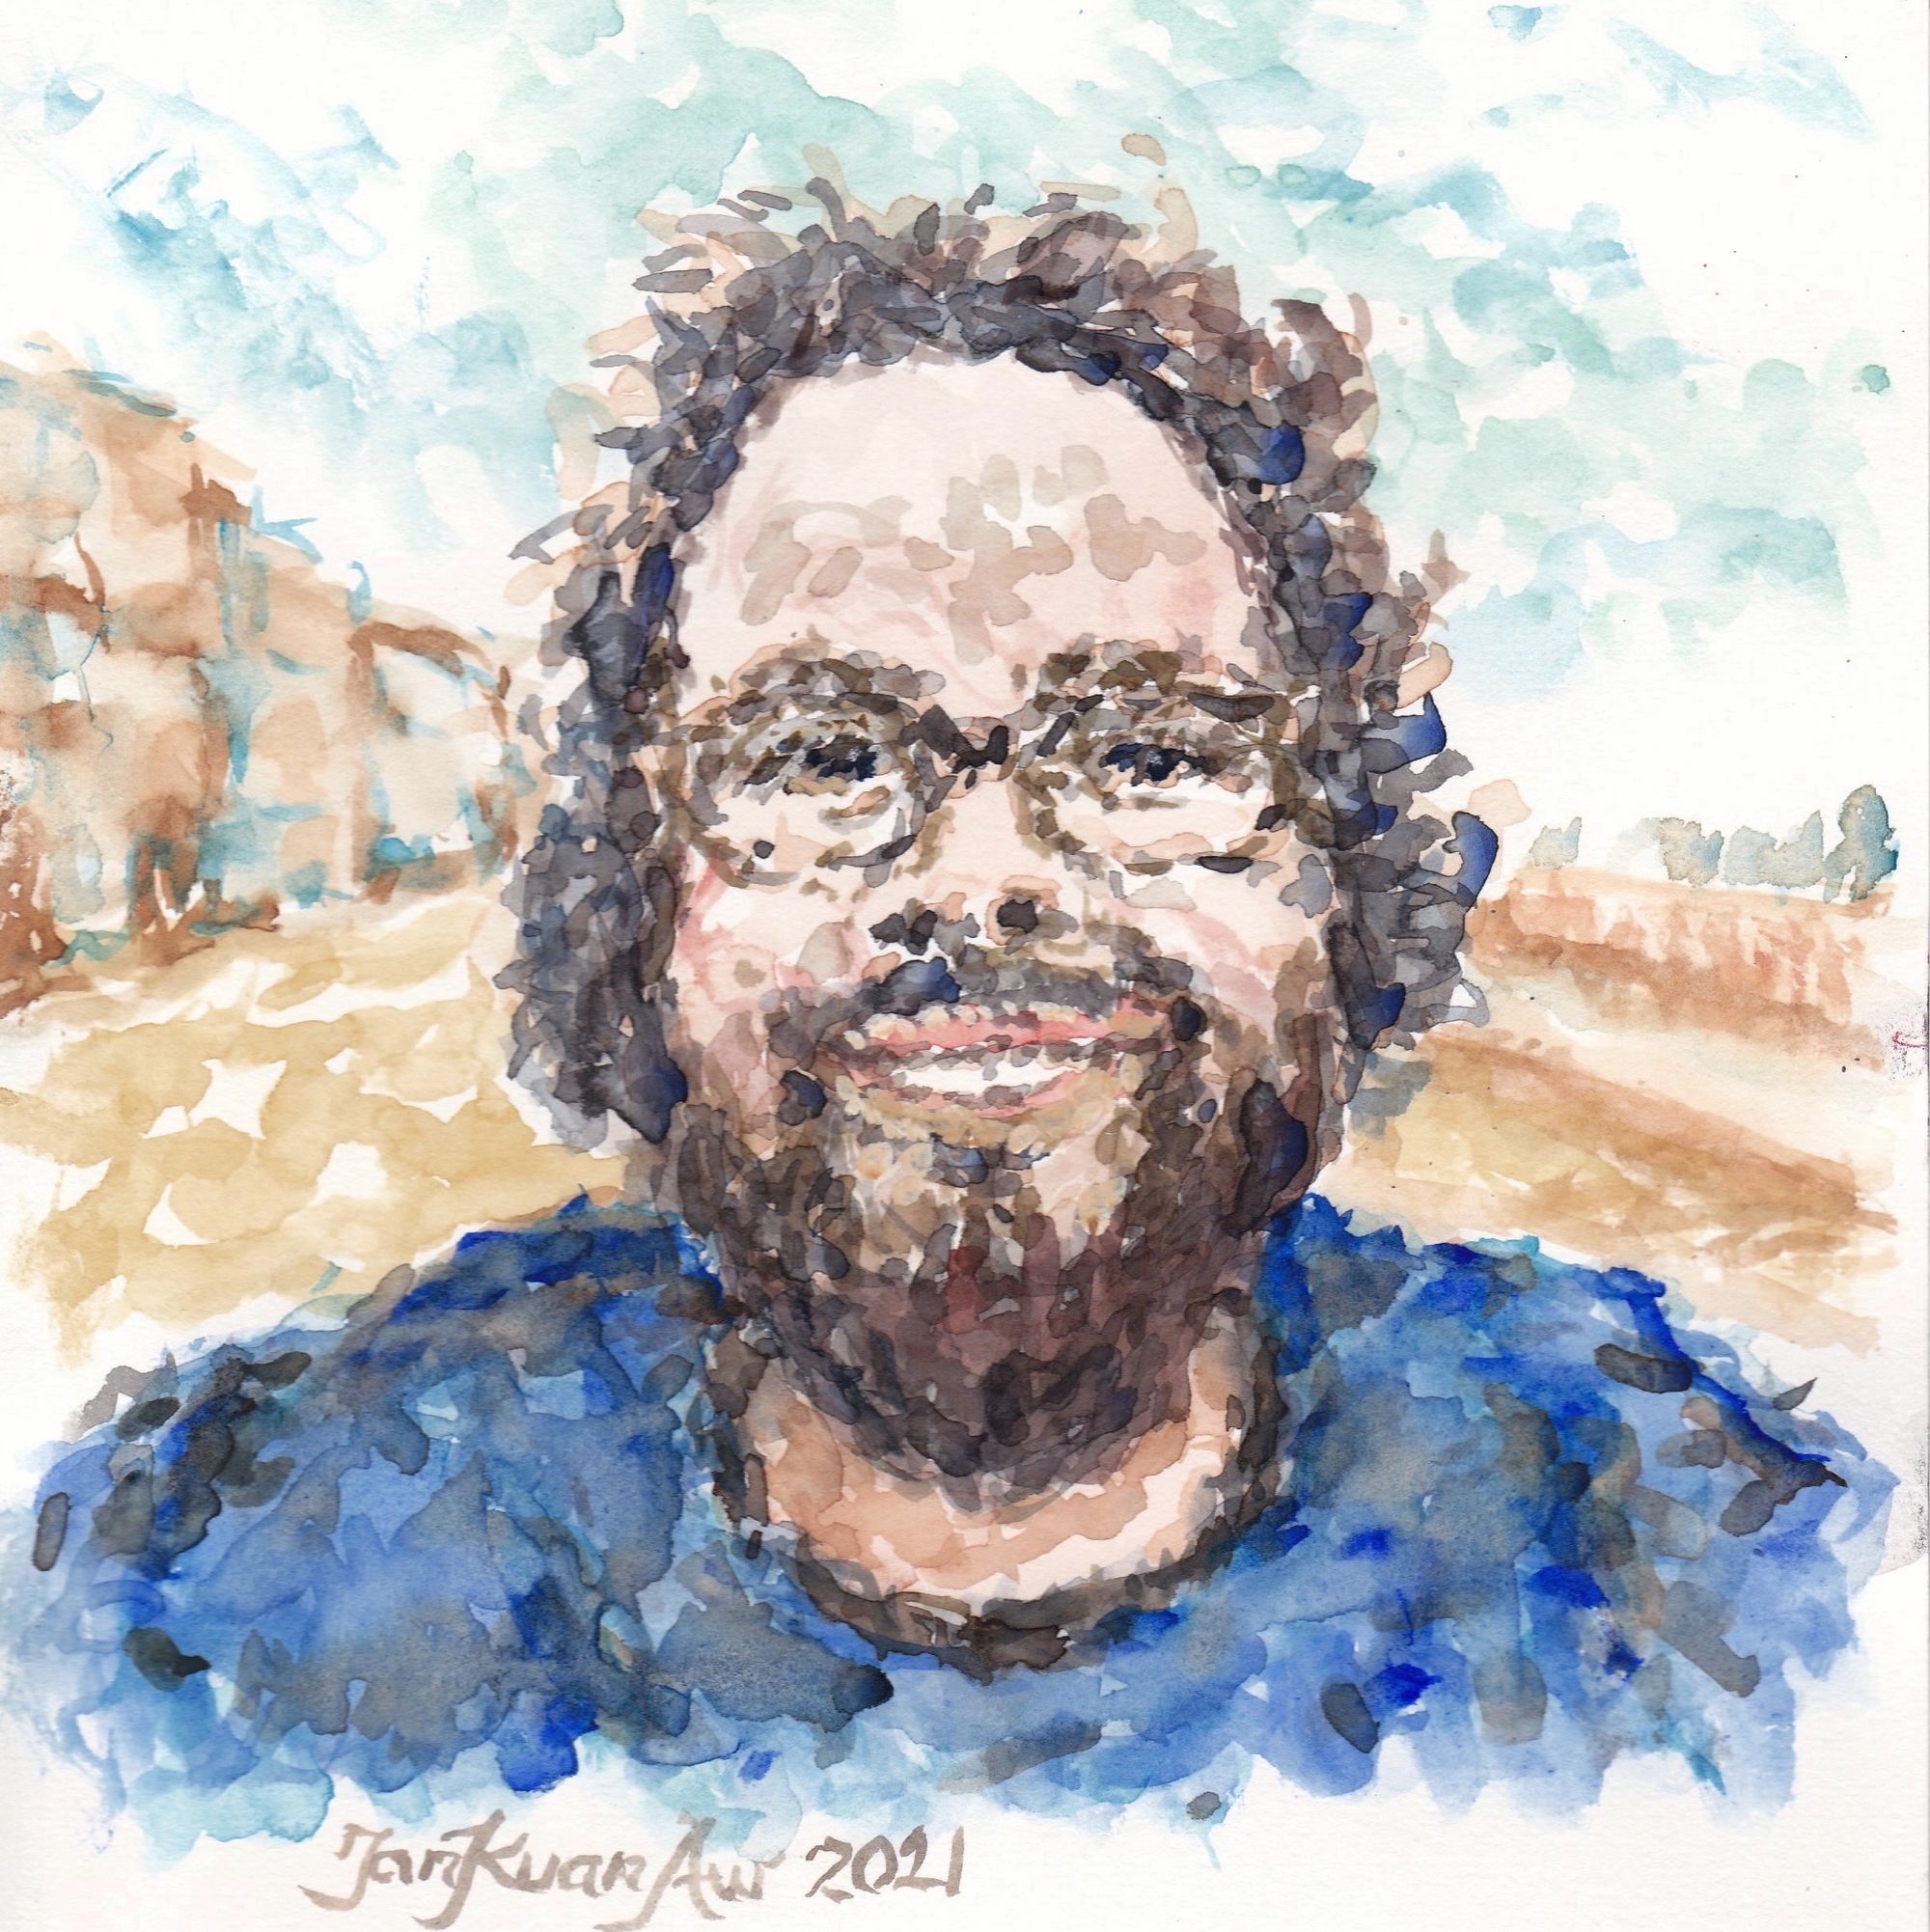 A watercolour portrait of Peter, a white man with dark curly hair, glasses, a beard, and a dark blue jumper